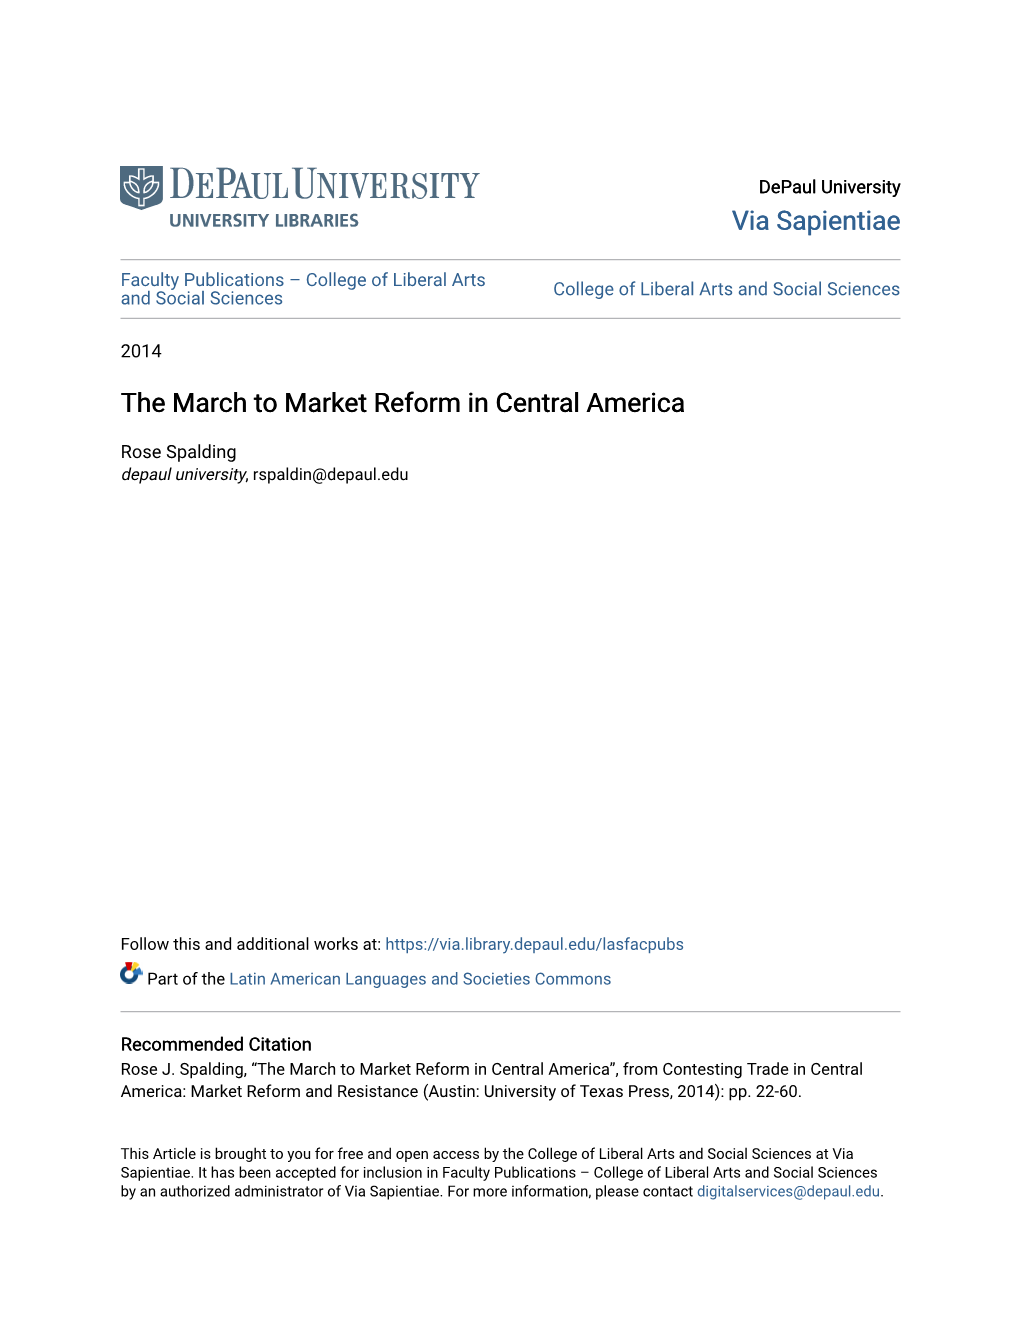 The March to Market Reform in Central America